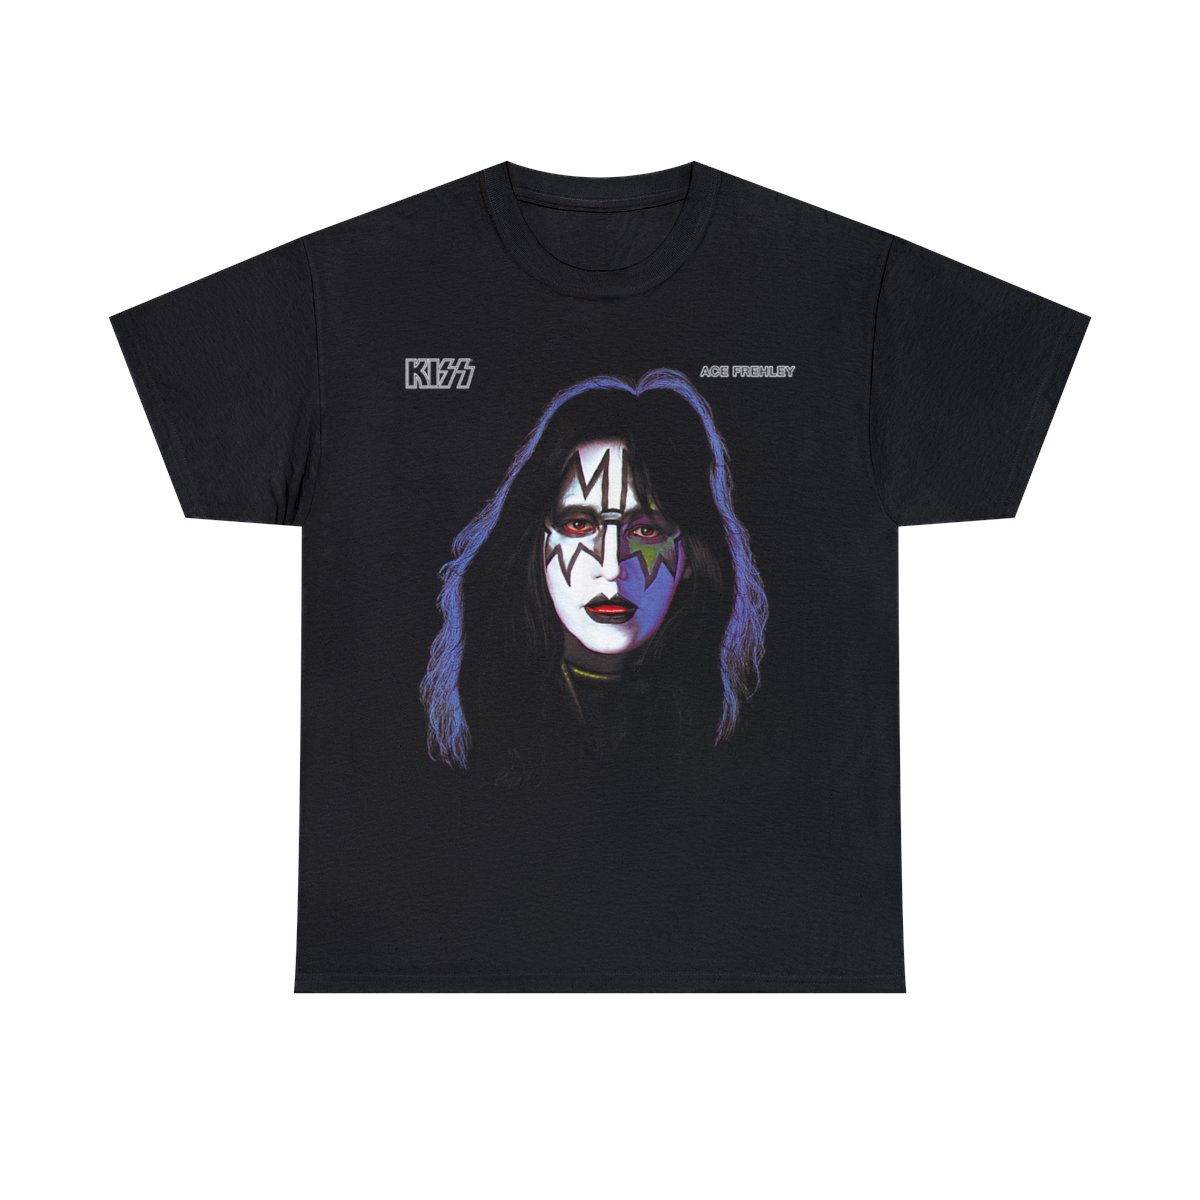 KISS – 1978 Ace Frehley Shirt, T-Shirt for men for women Unisex Heavy Cotton Tee